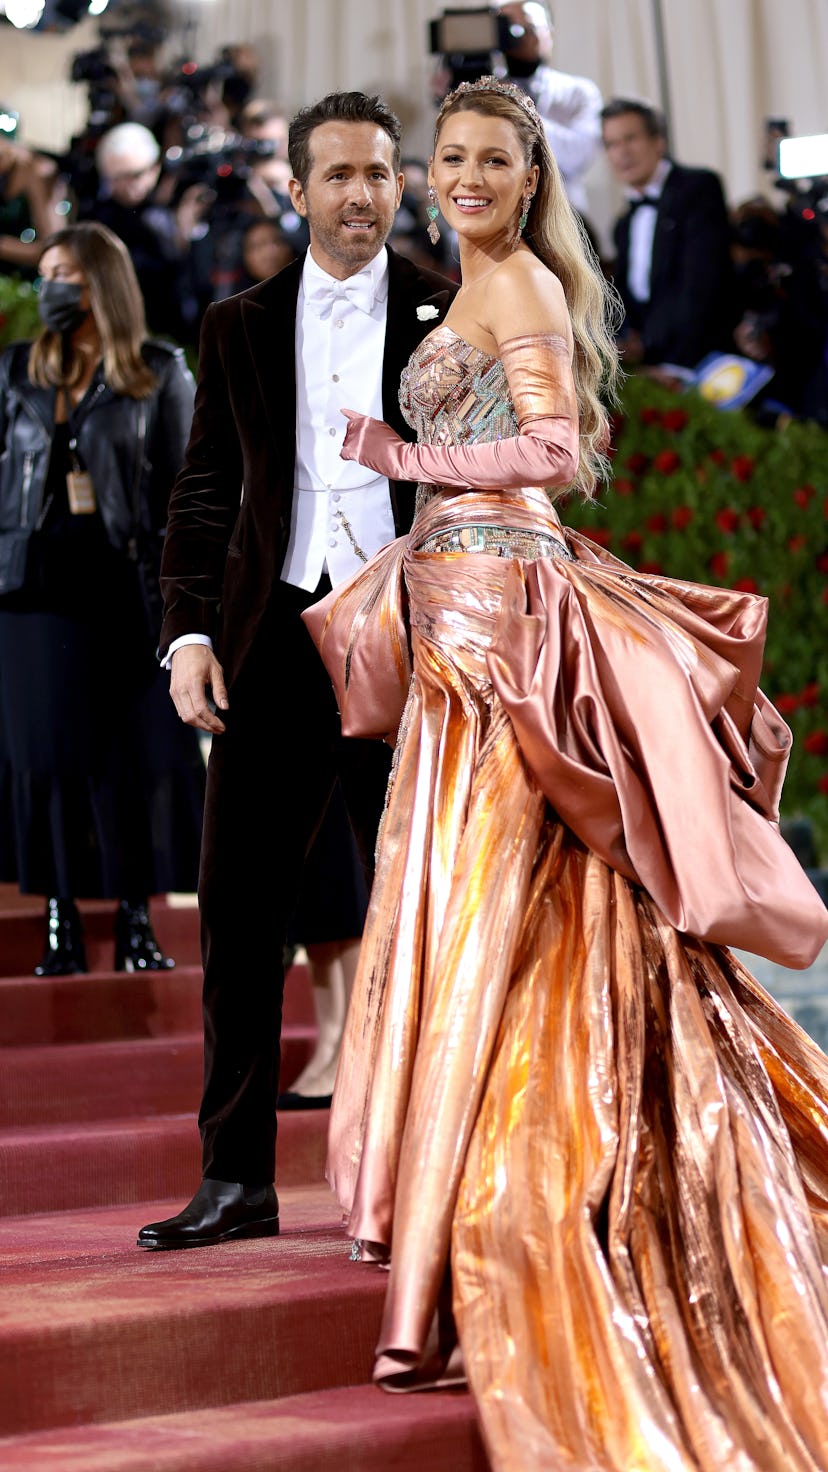 Blake Lively and Ryan Reynolds had so many glam photos at the 2022 Met Gala.